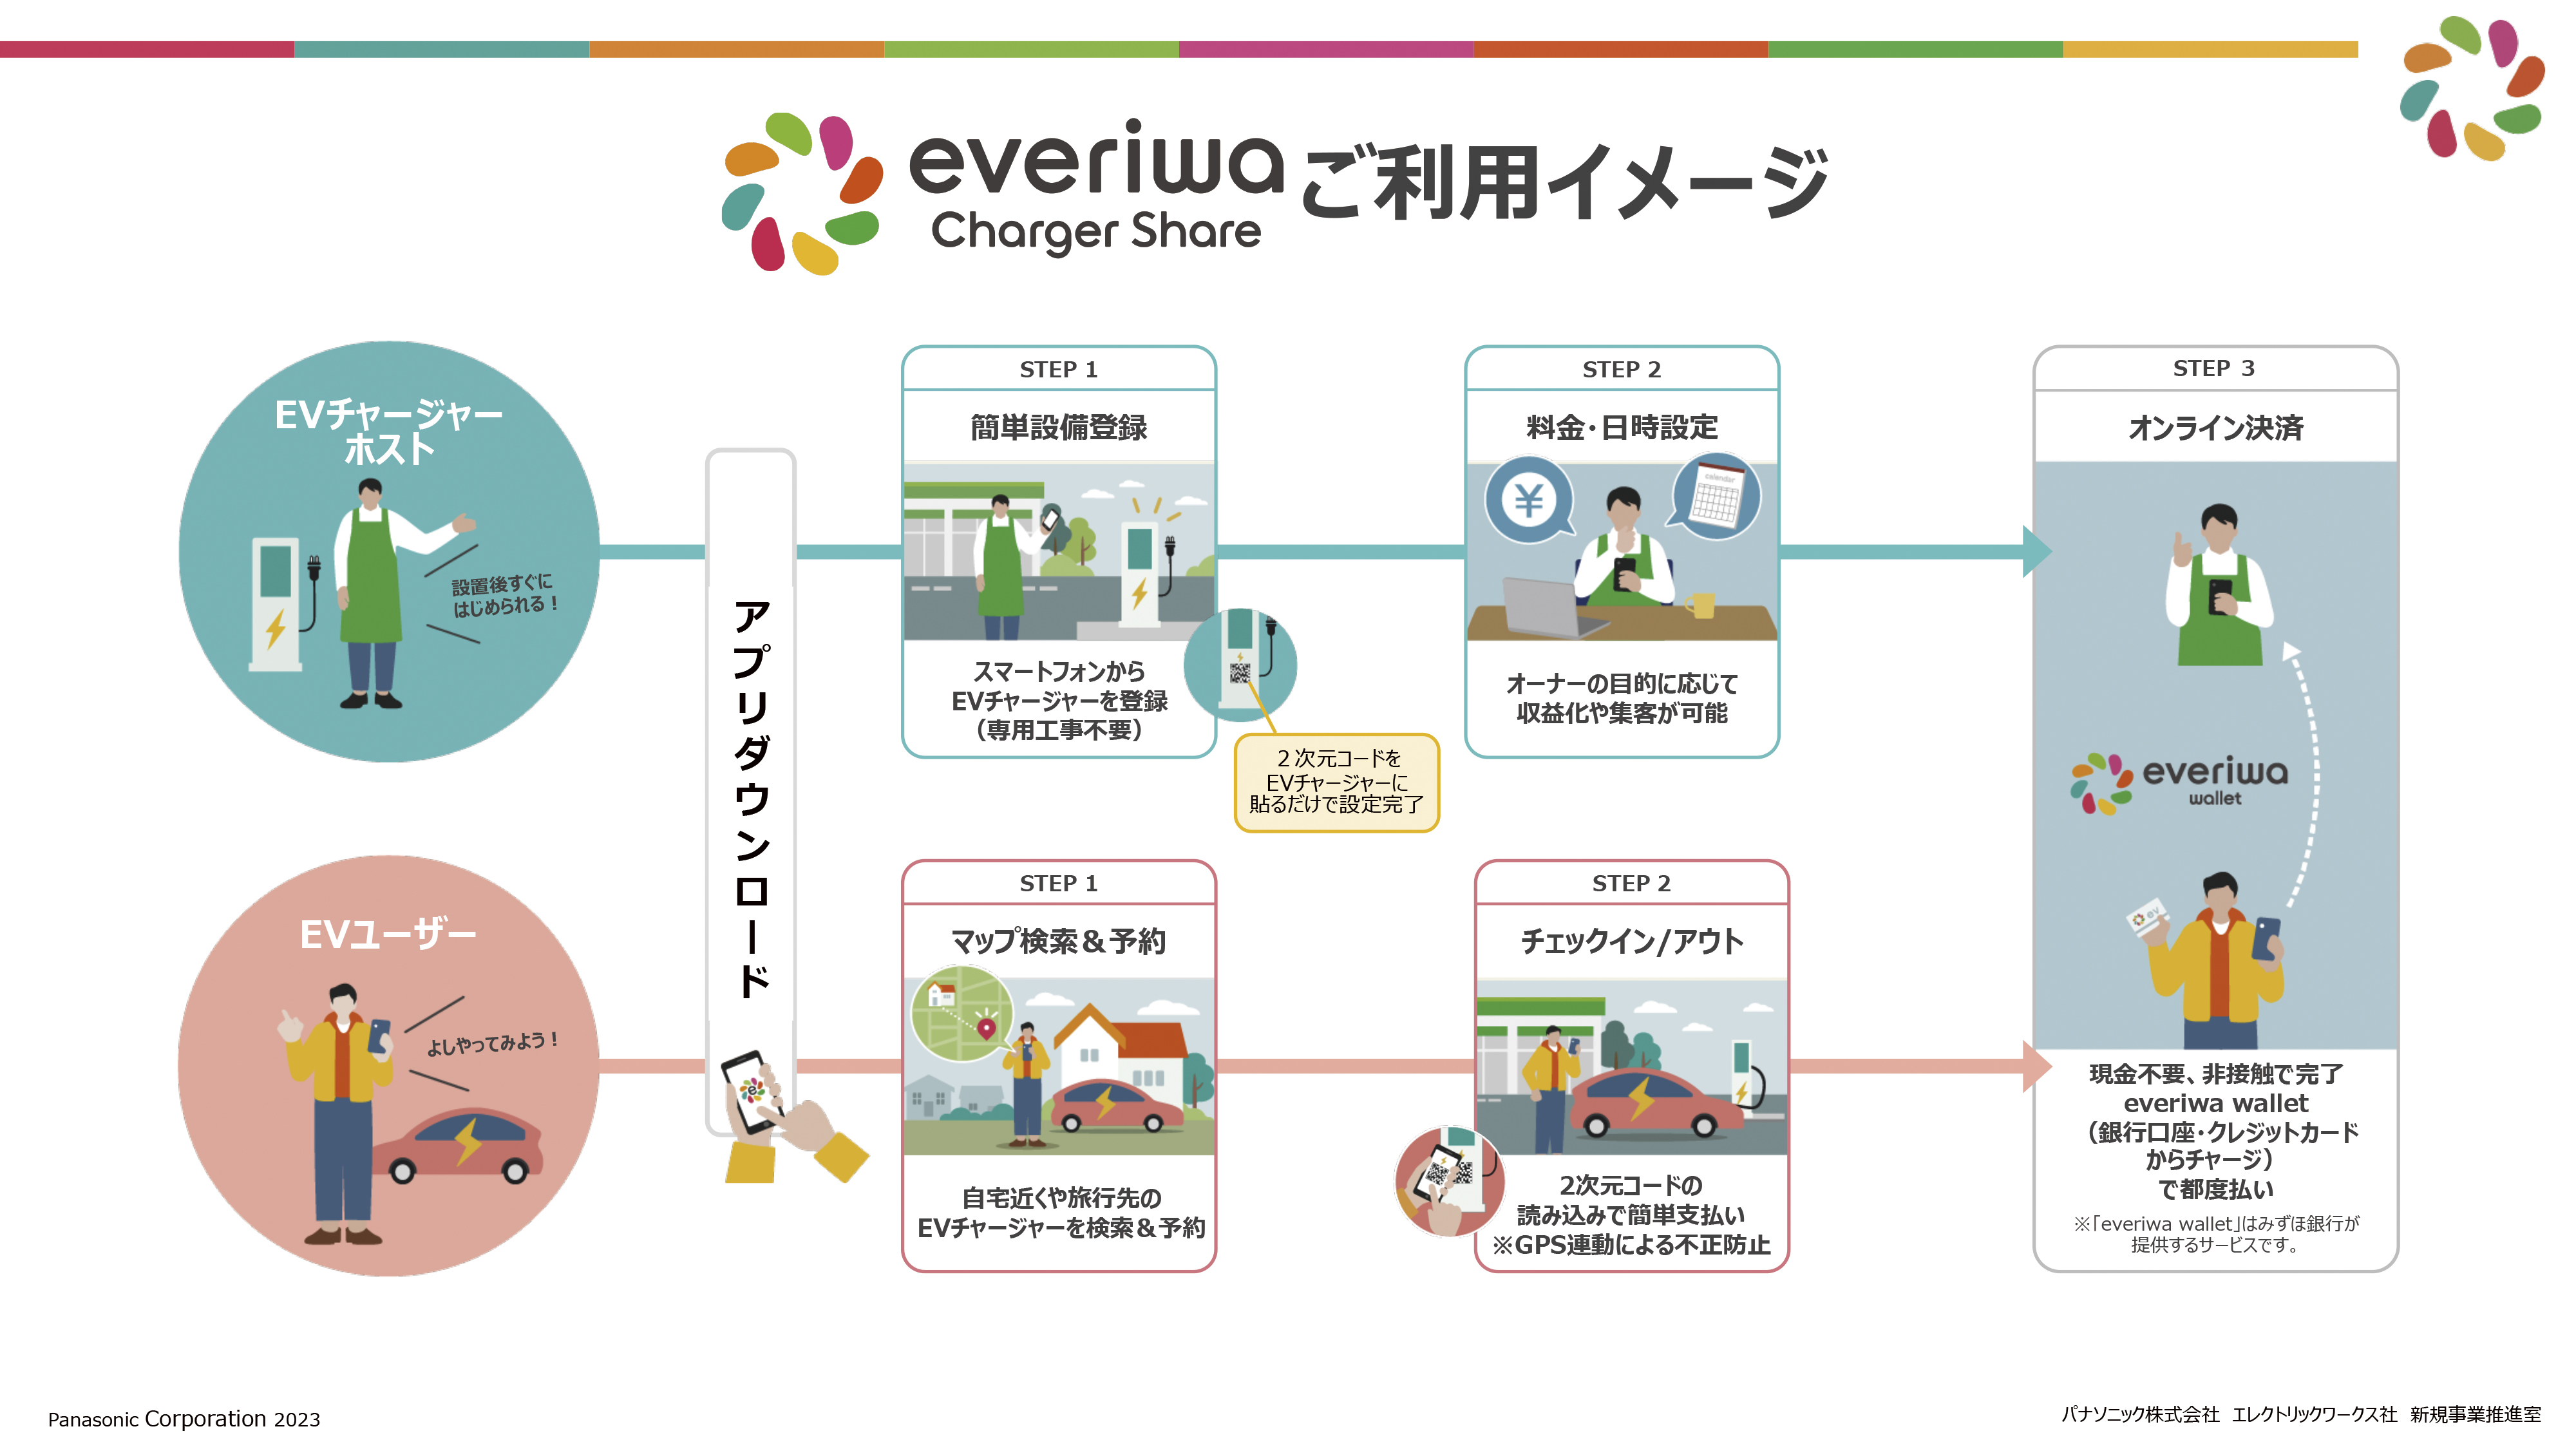 everiwa Charger Shareご利用イメージ